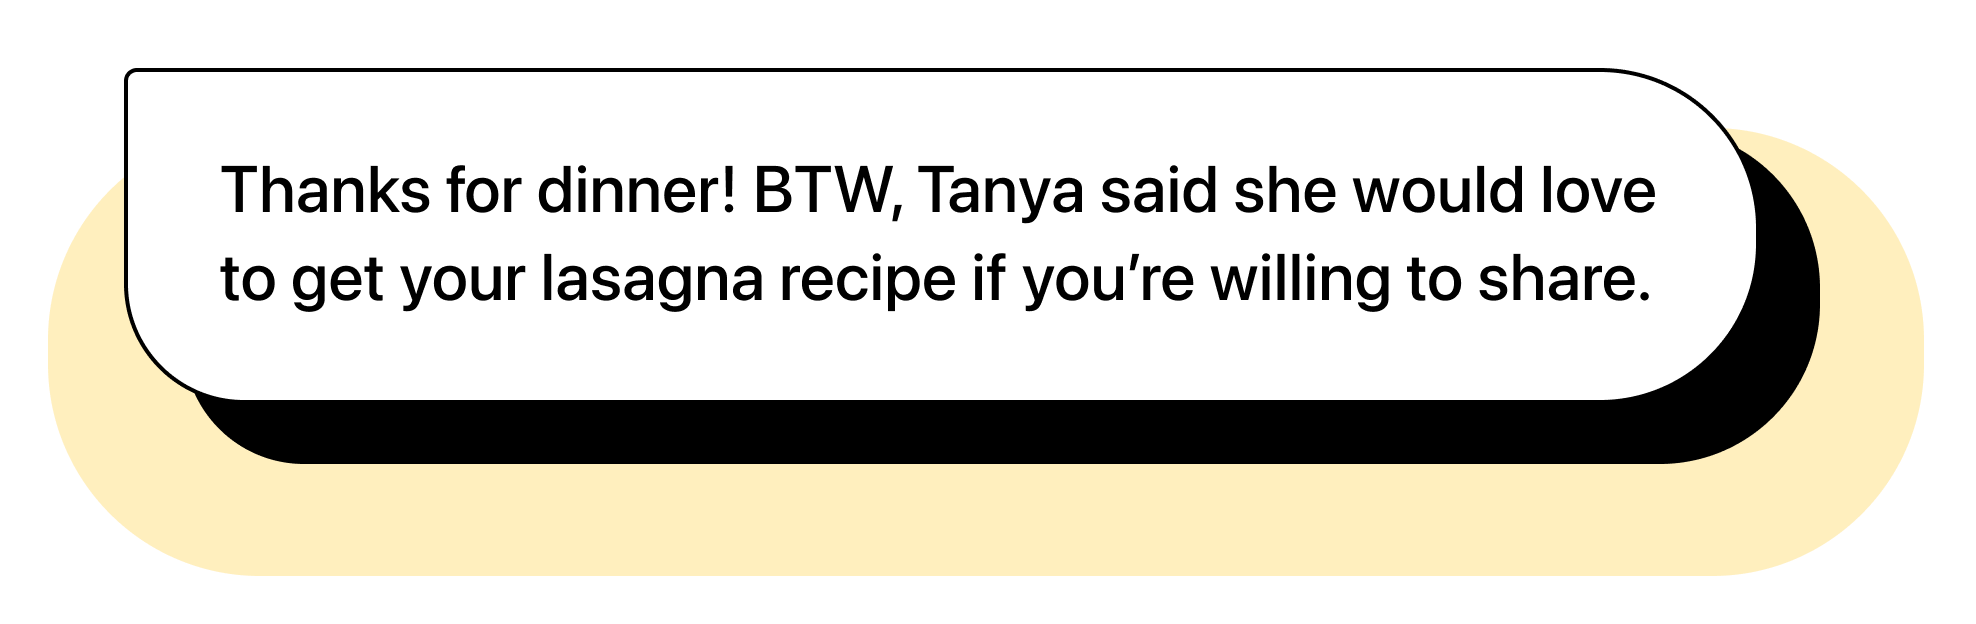 Chat bubble illustration with text: "Thanks for dinner! BTW, Tanya said she would love to get your lasagna recipe if you’re willing to share."